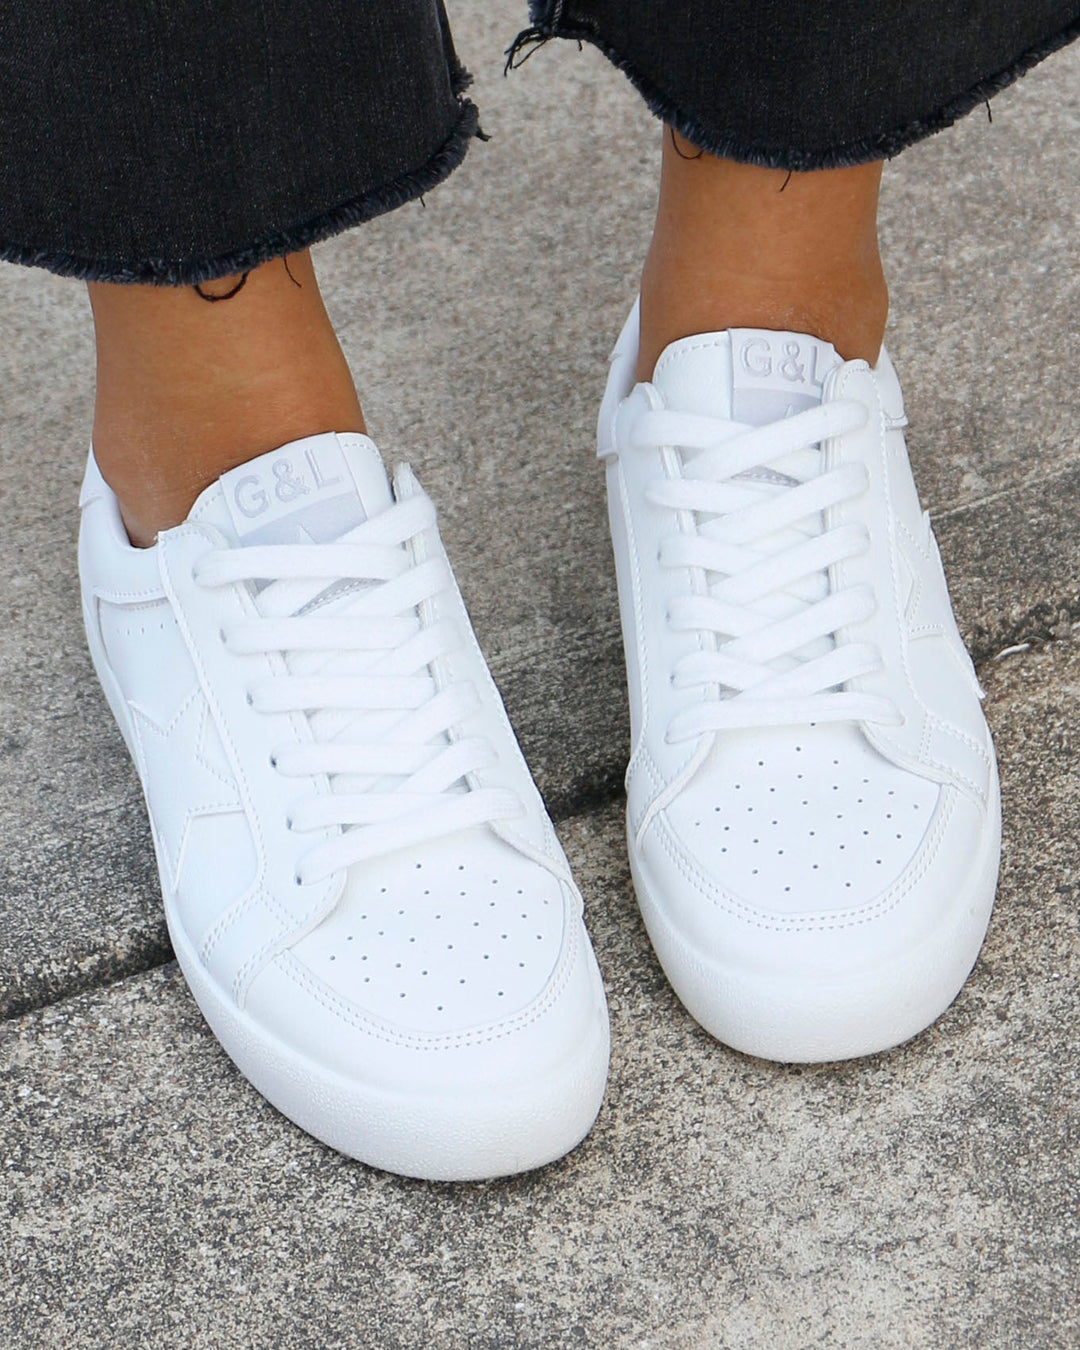 Star Sneakers by Grace & Lace